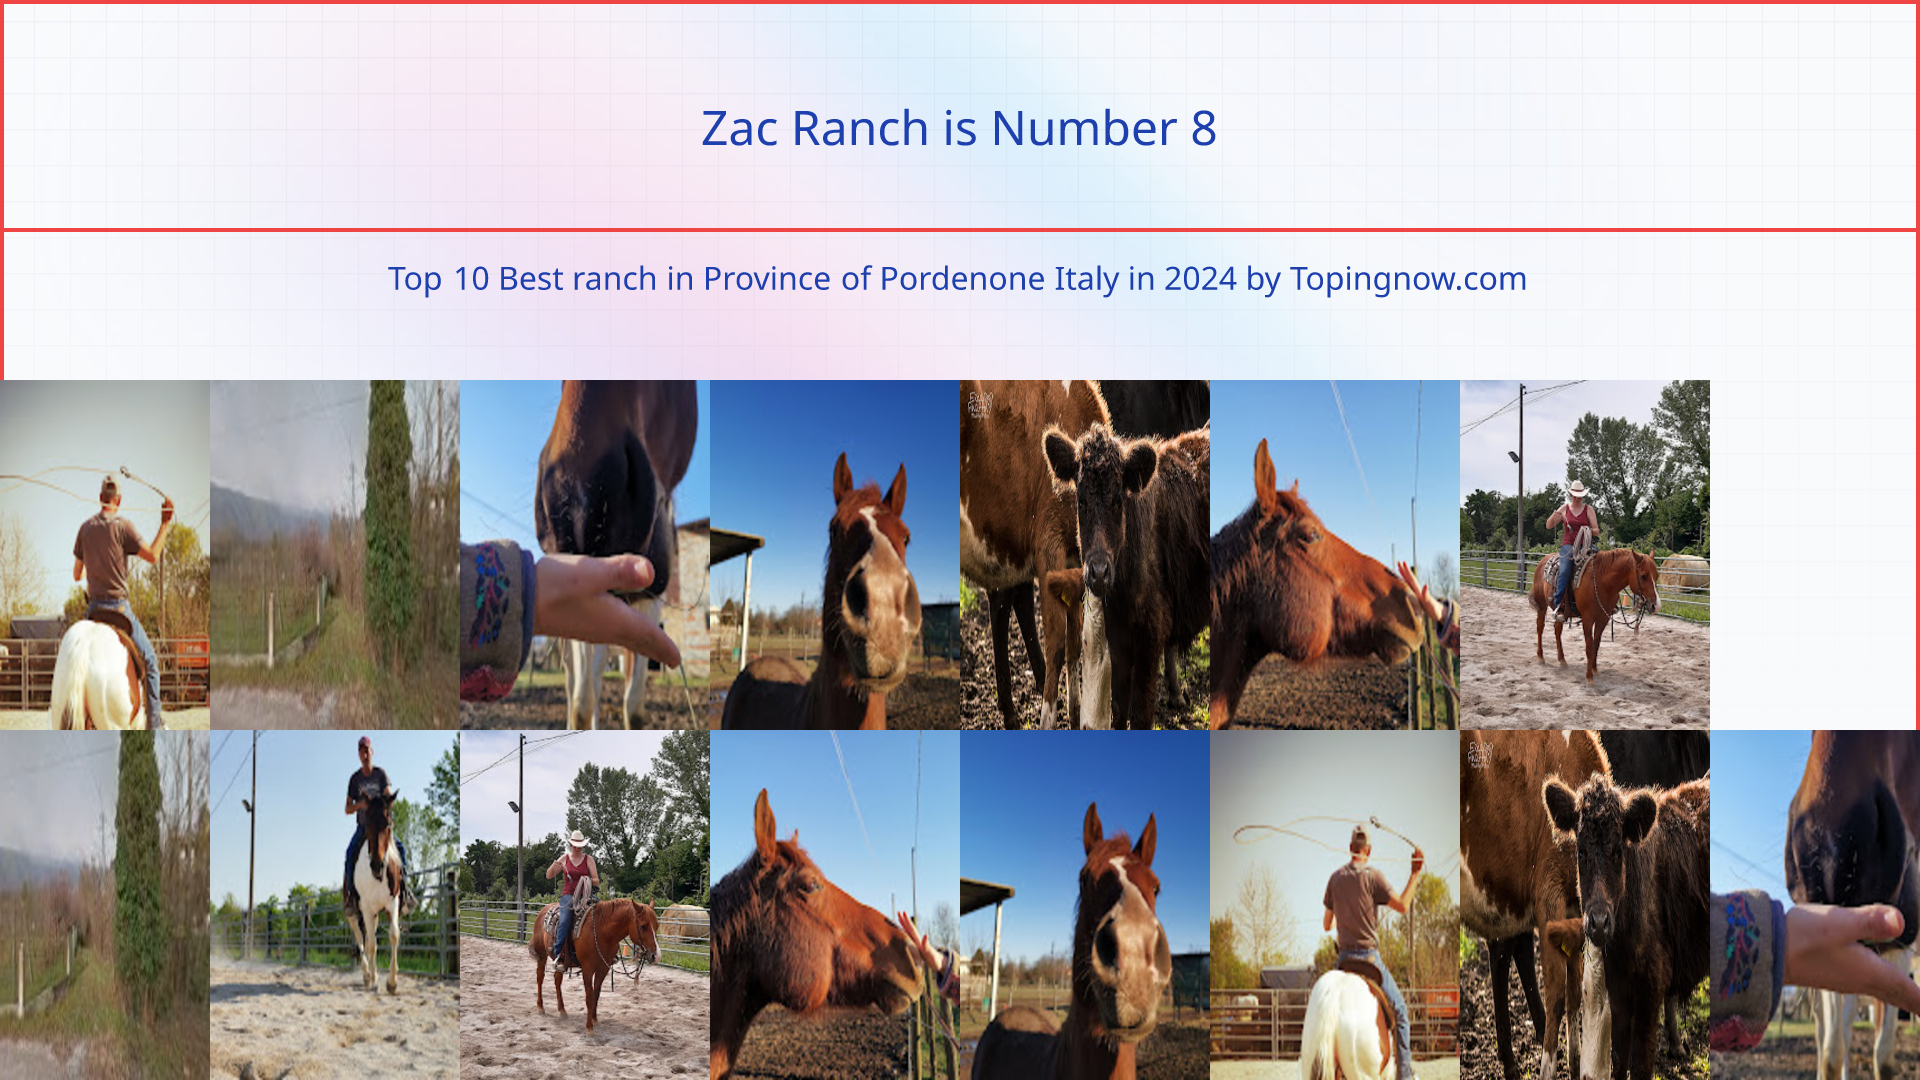 Zac Ranch: Top 10 Best ranch in Province of Pordenone Italy in 2024